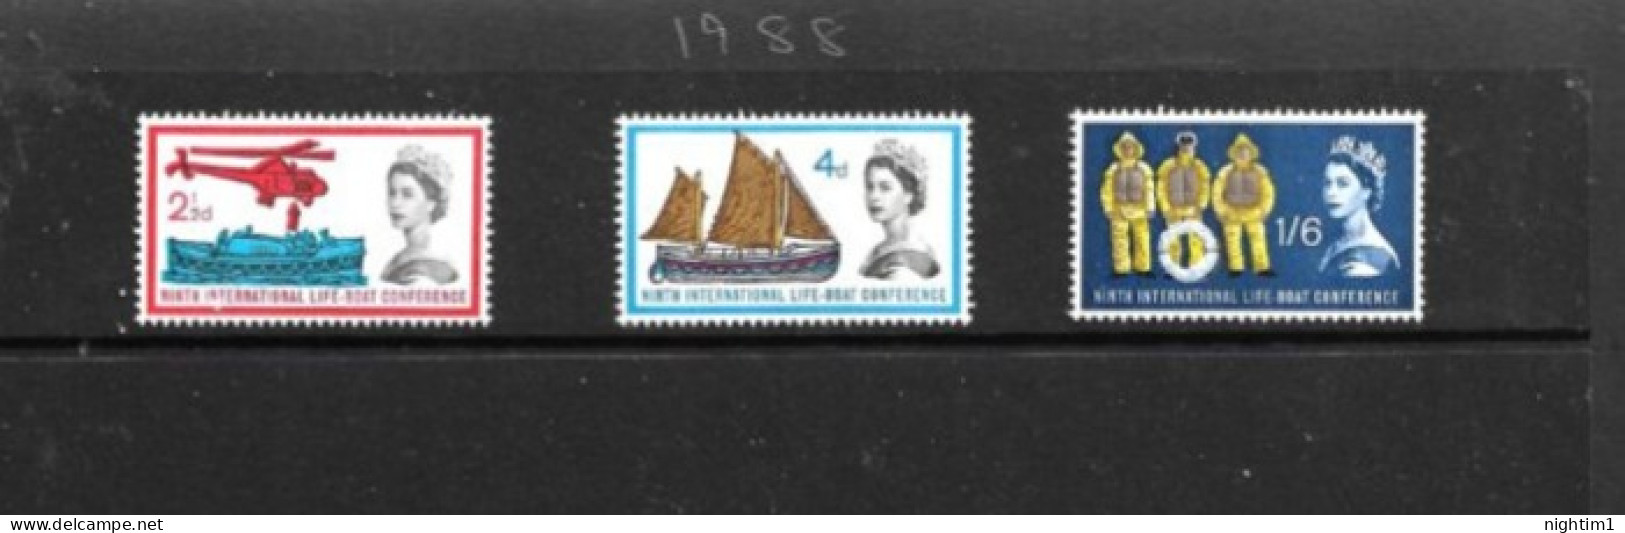 GREAT BRITAIN COLLECTION.  ELIZABETH II LIFEBOAT SET OF 3. PHOSPHOR. UNMOUNTED MINT. - Neufs